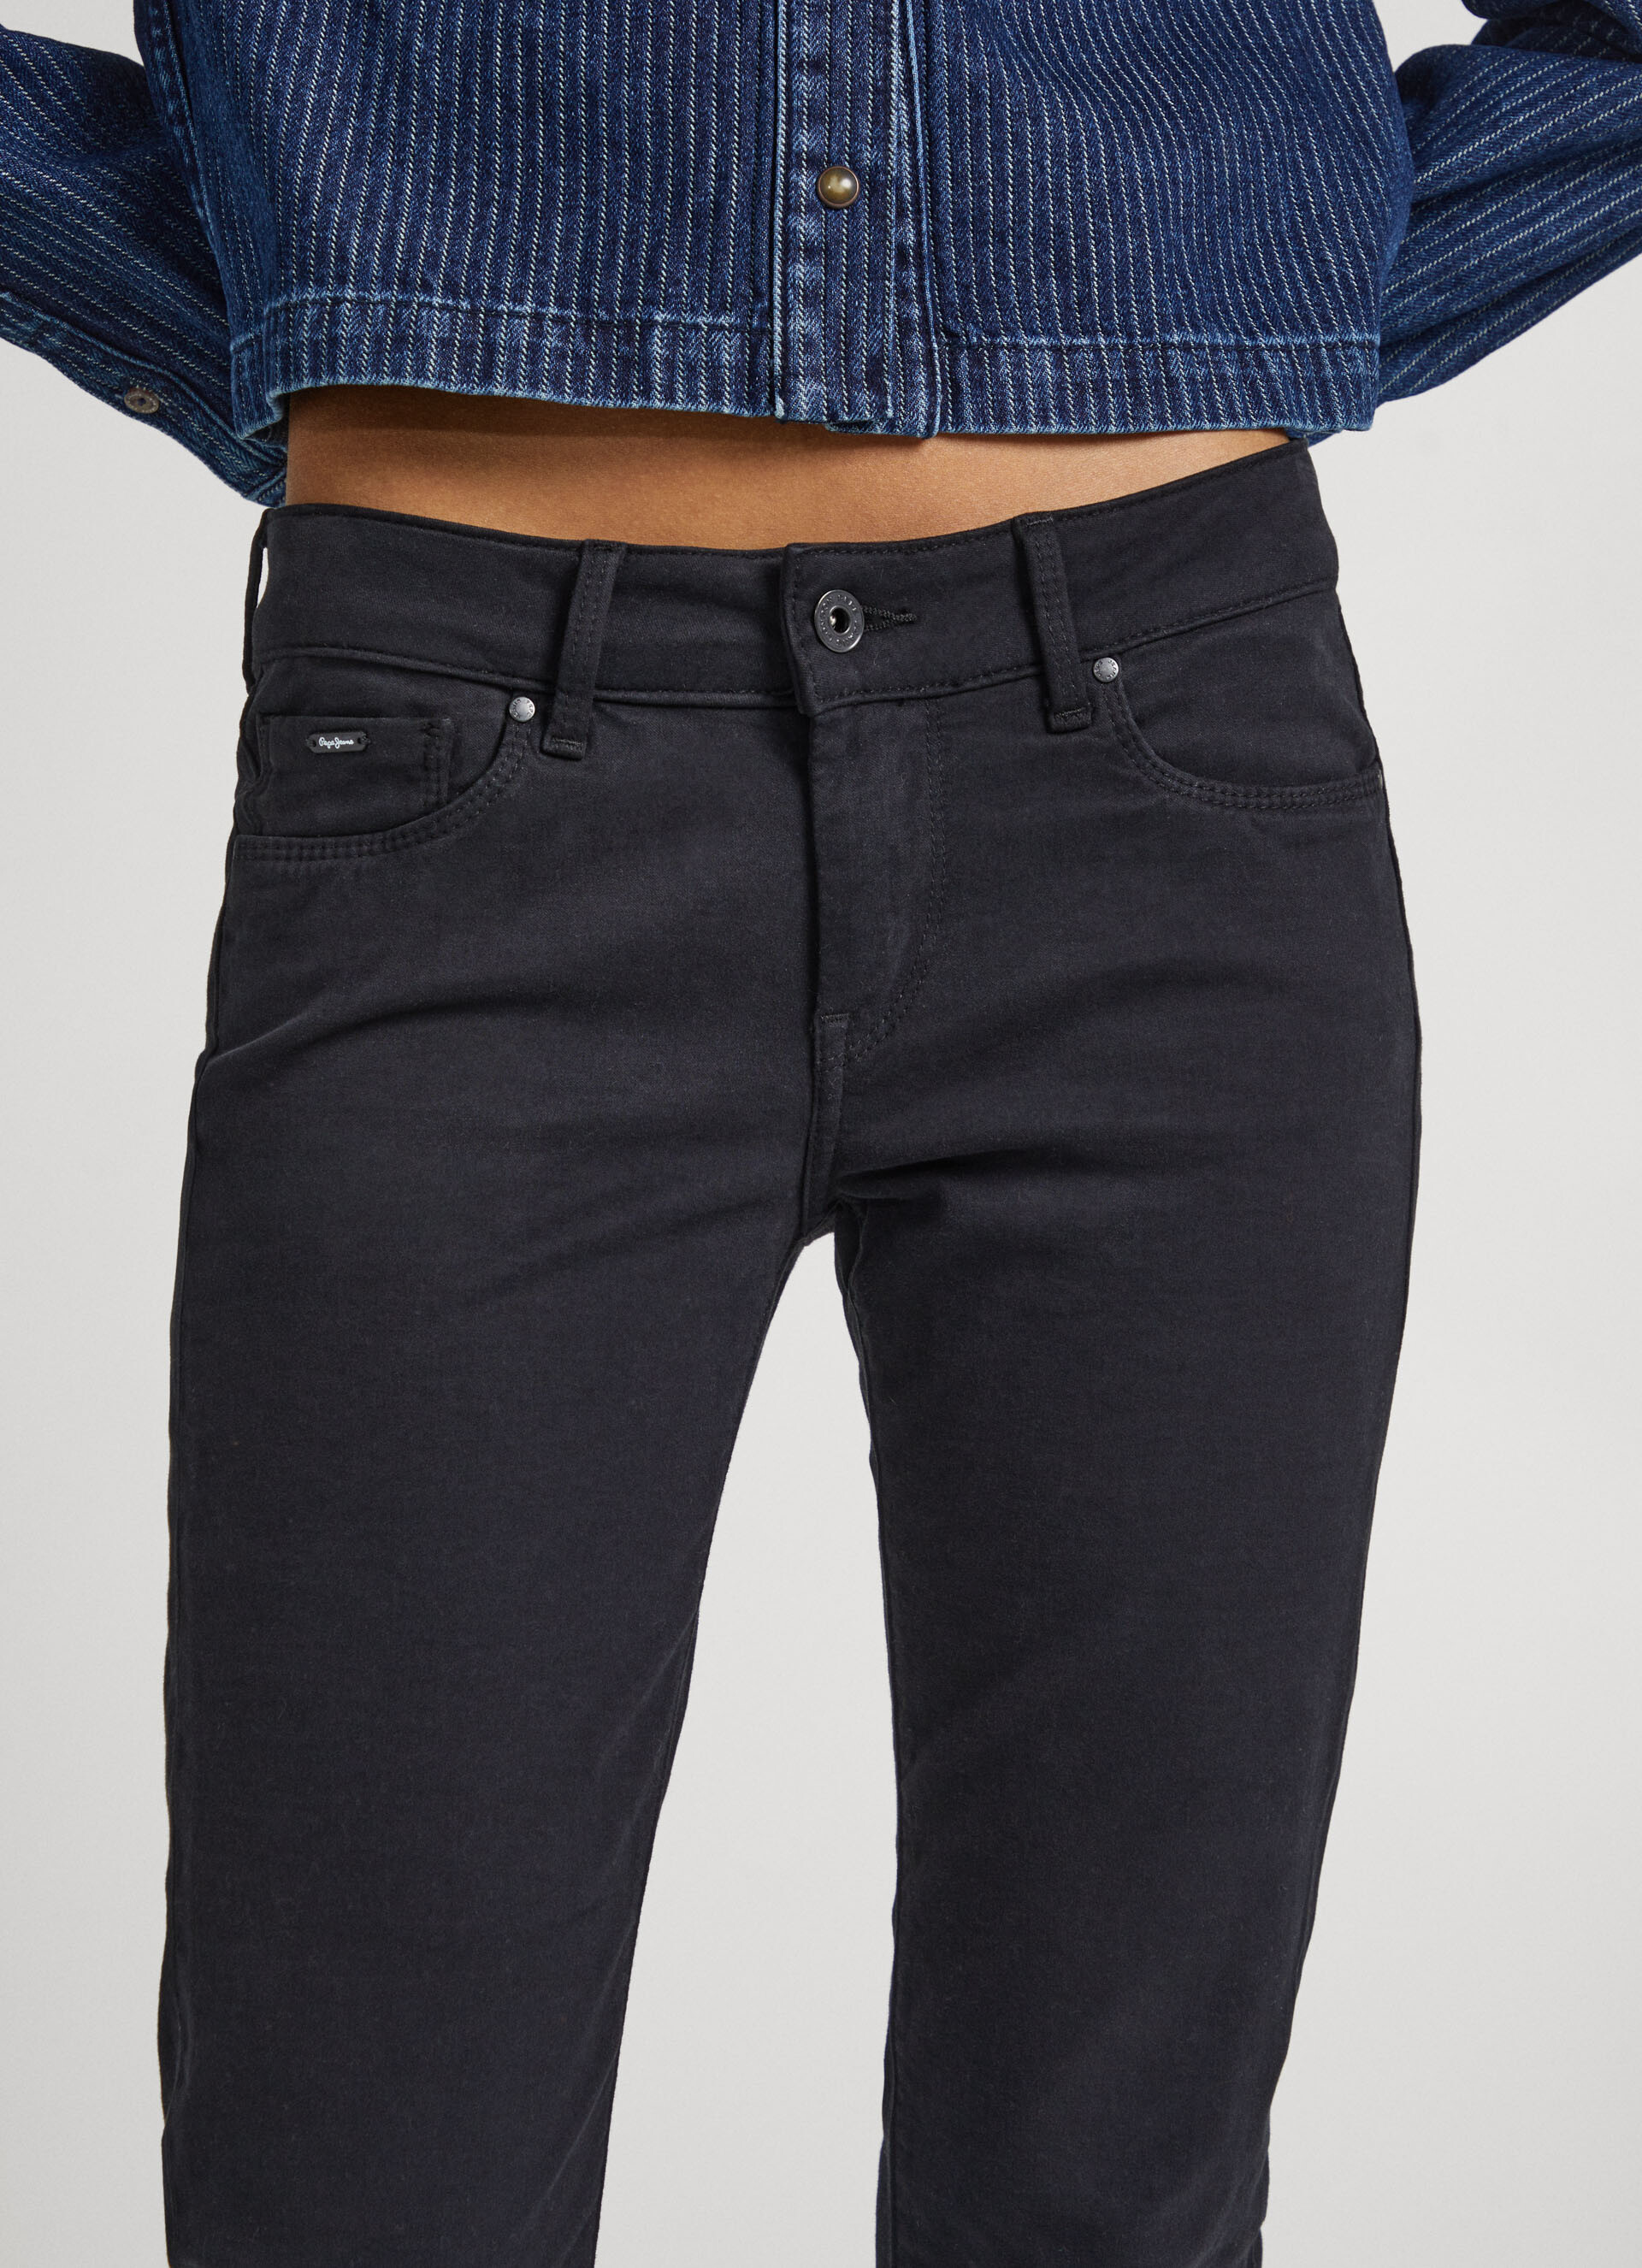 5 Pocket Skinny Fit Trousers | Pepe Jeans